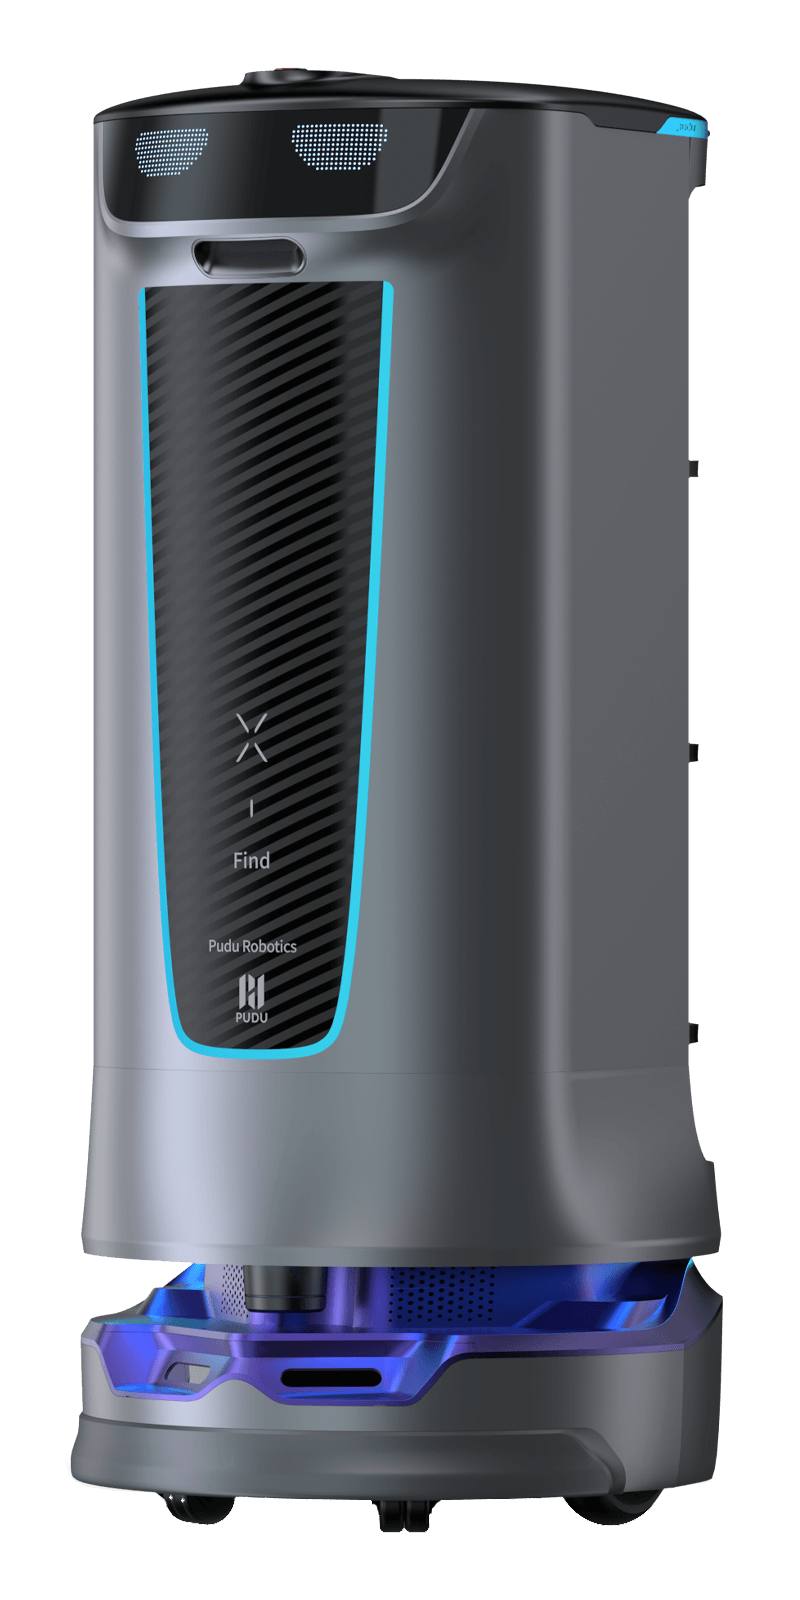 A Delivery Robot That Features Pager and Notifications